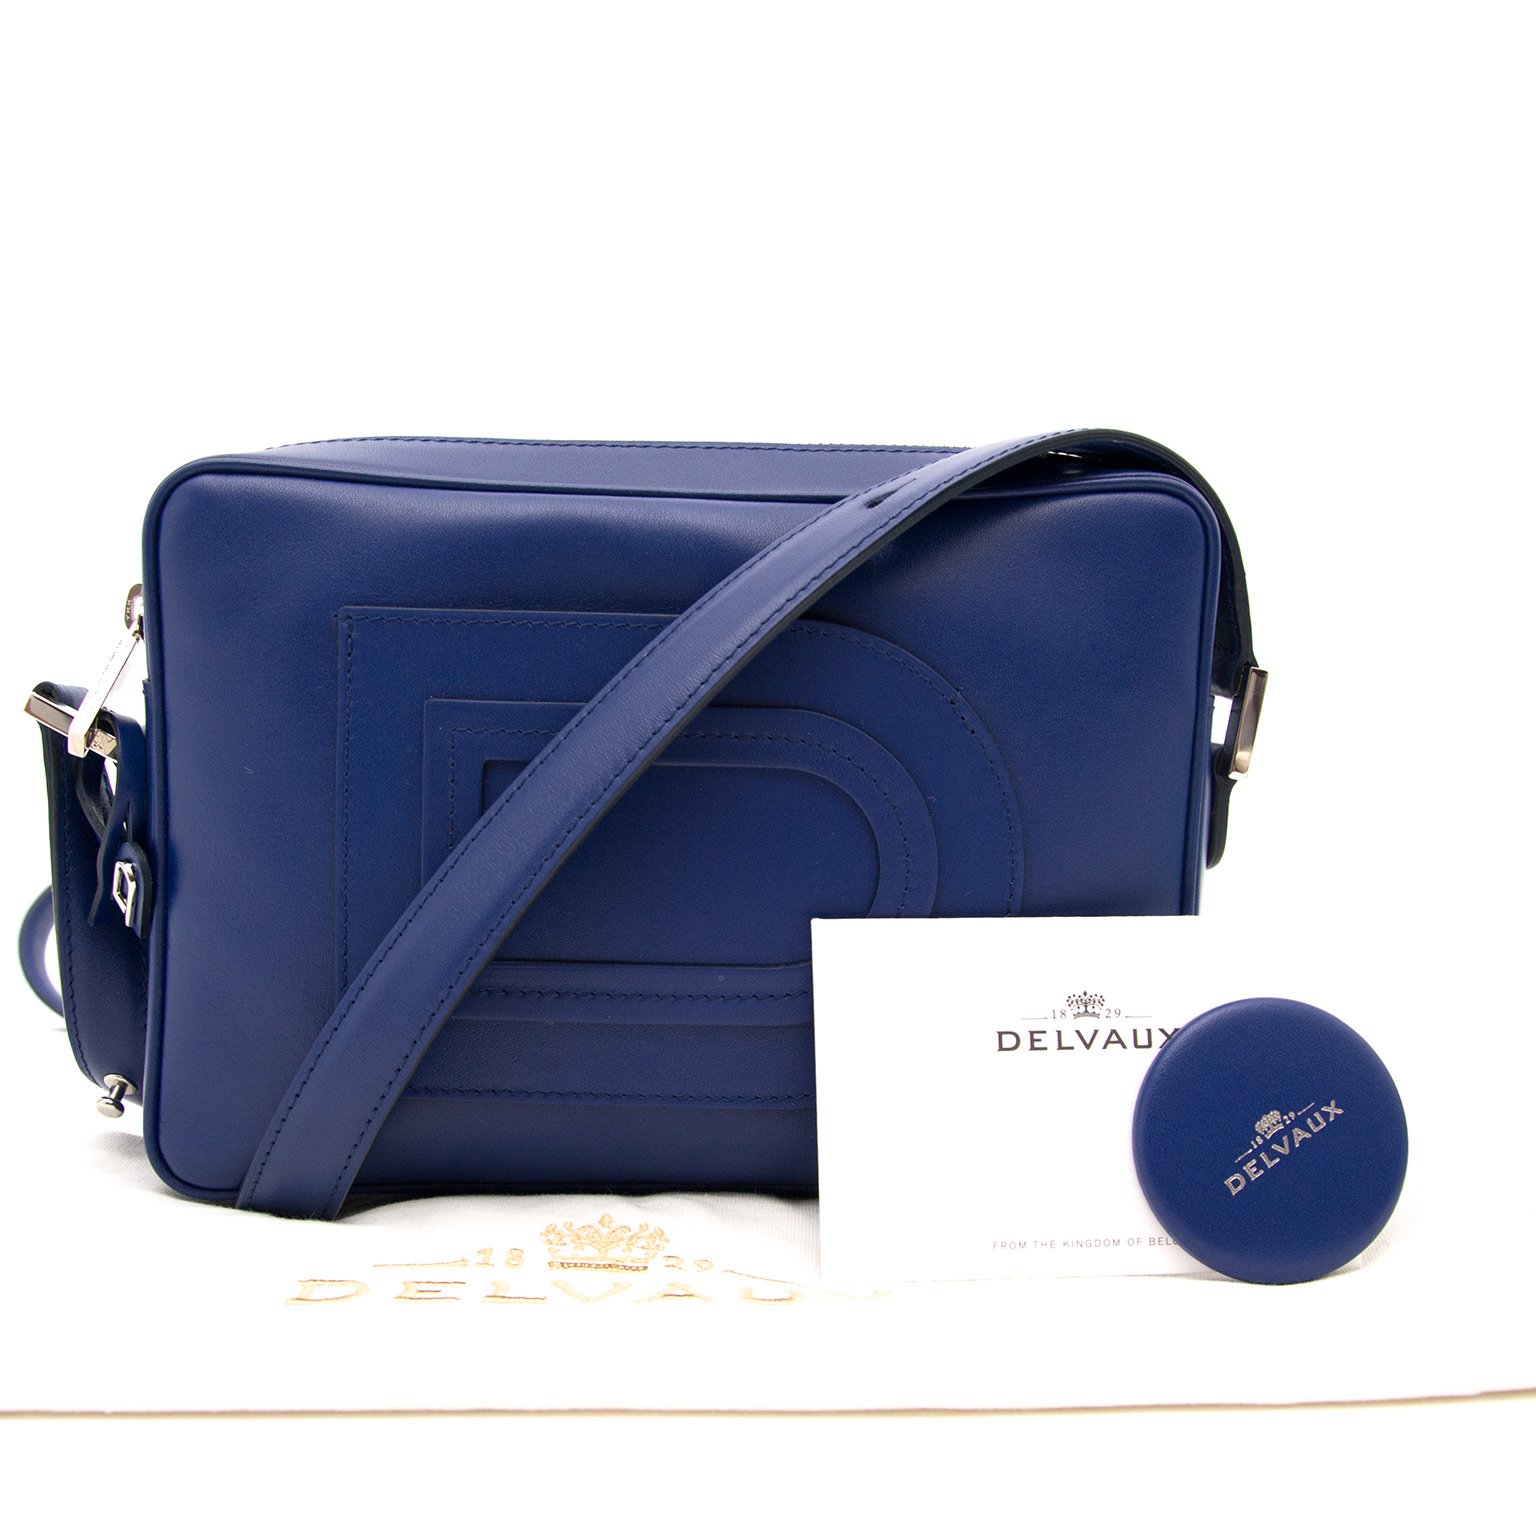 Delvaux - Authenticated Cool Box Handbag - Leather Blue for Women, Very Good Condition